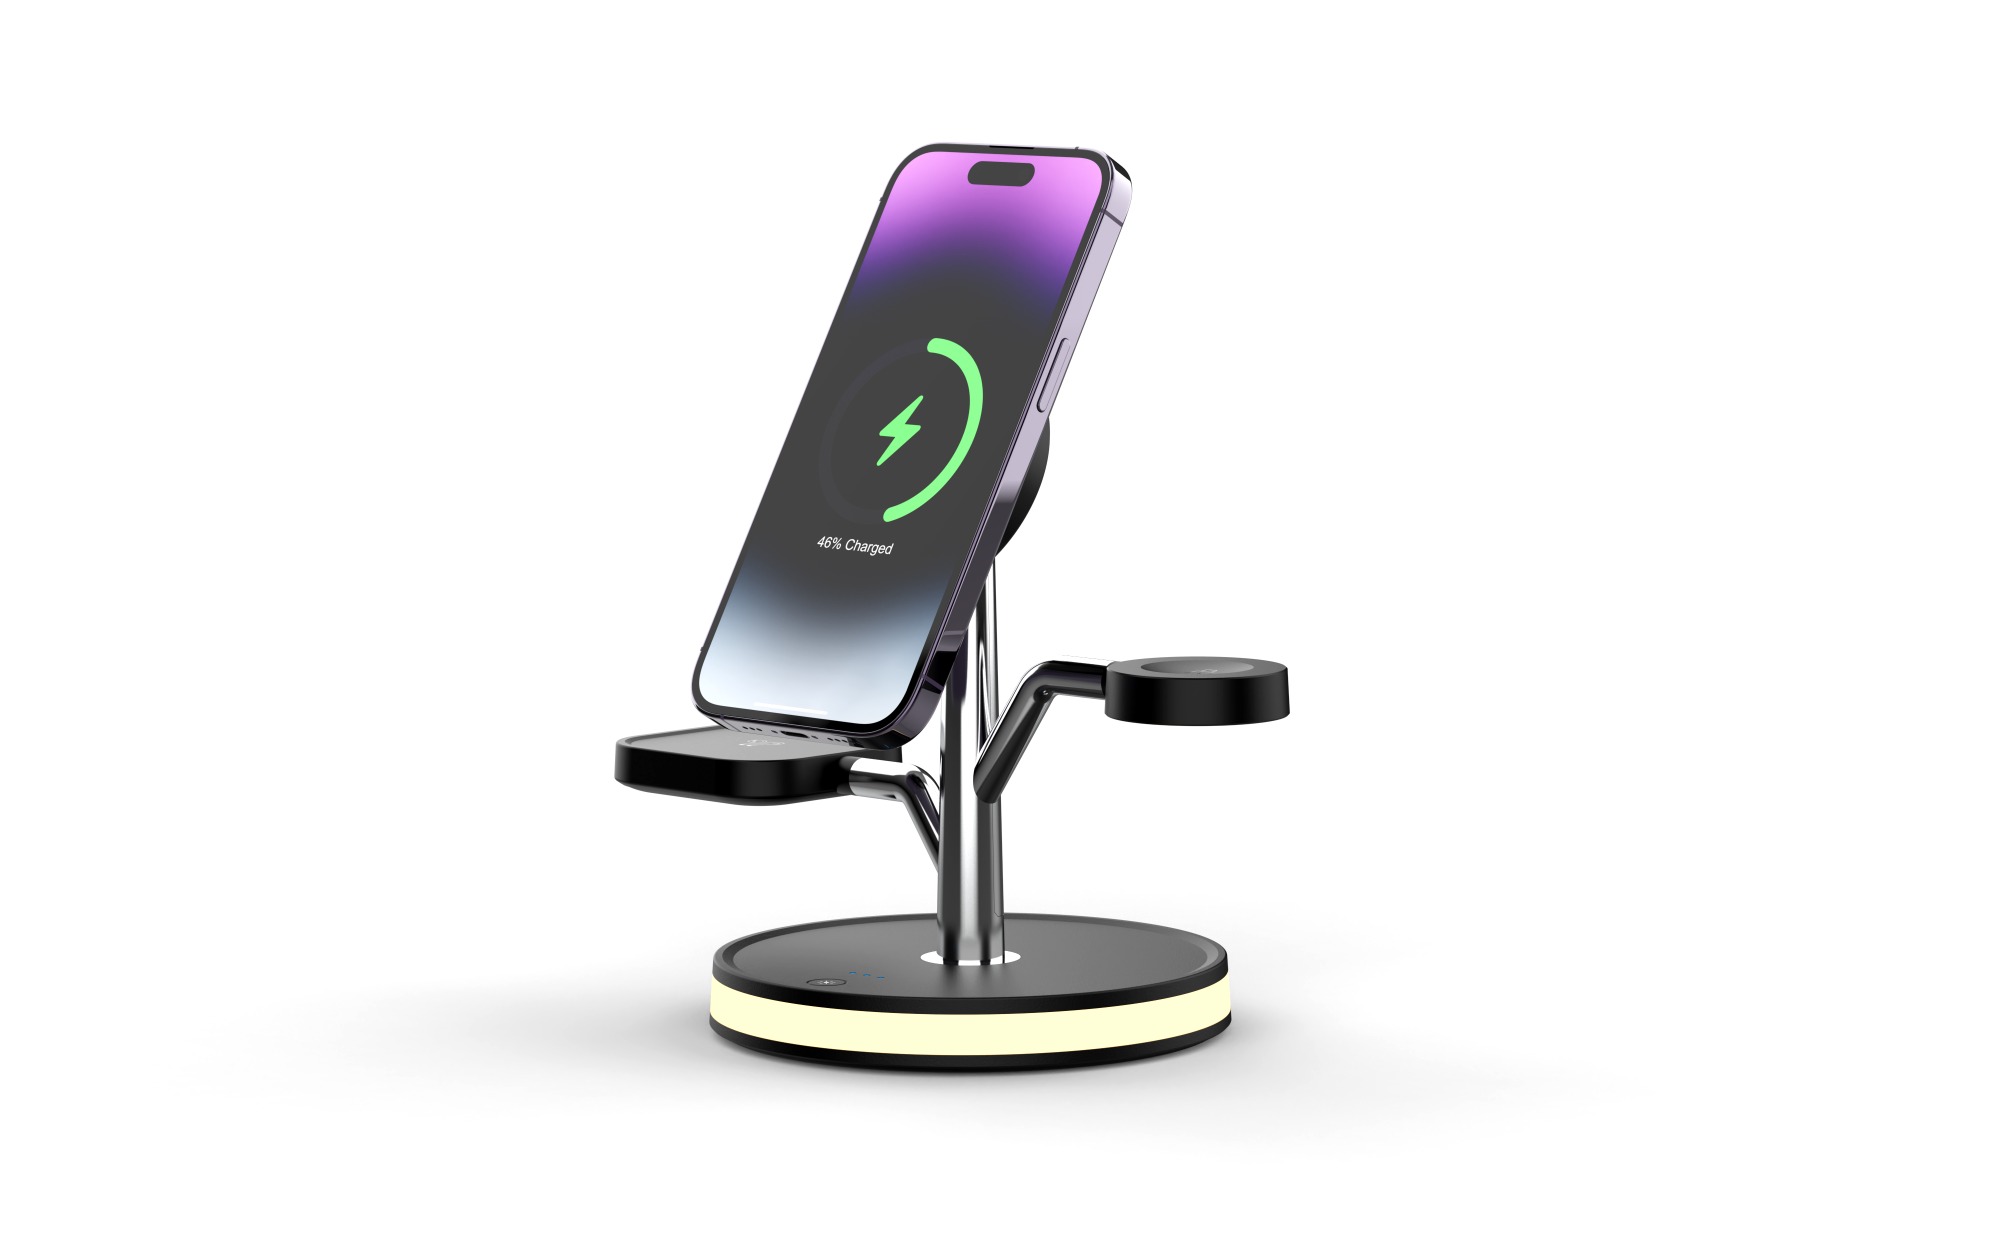 5 in 1 Magnetic Wireless Charger